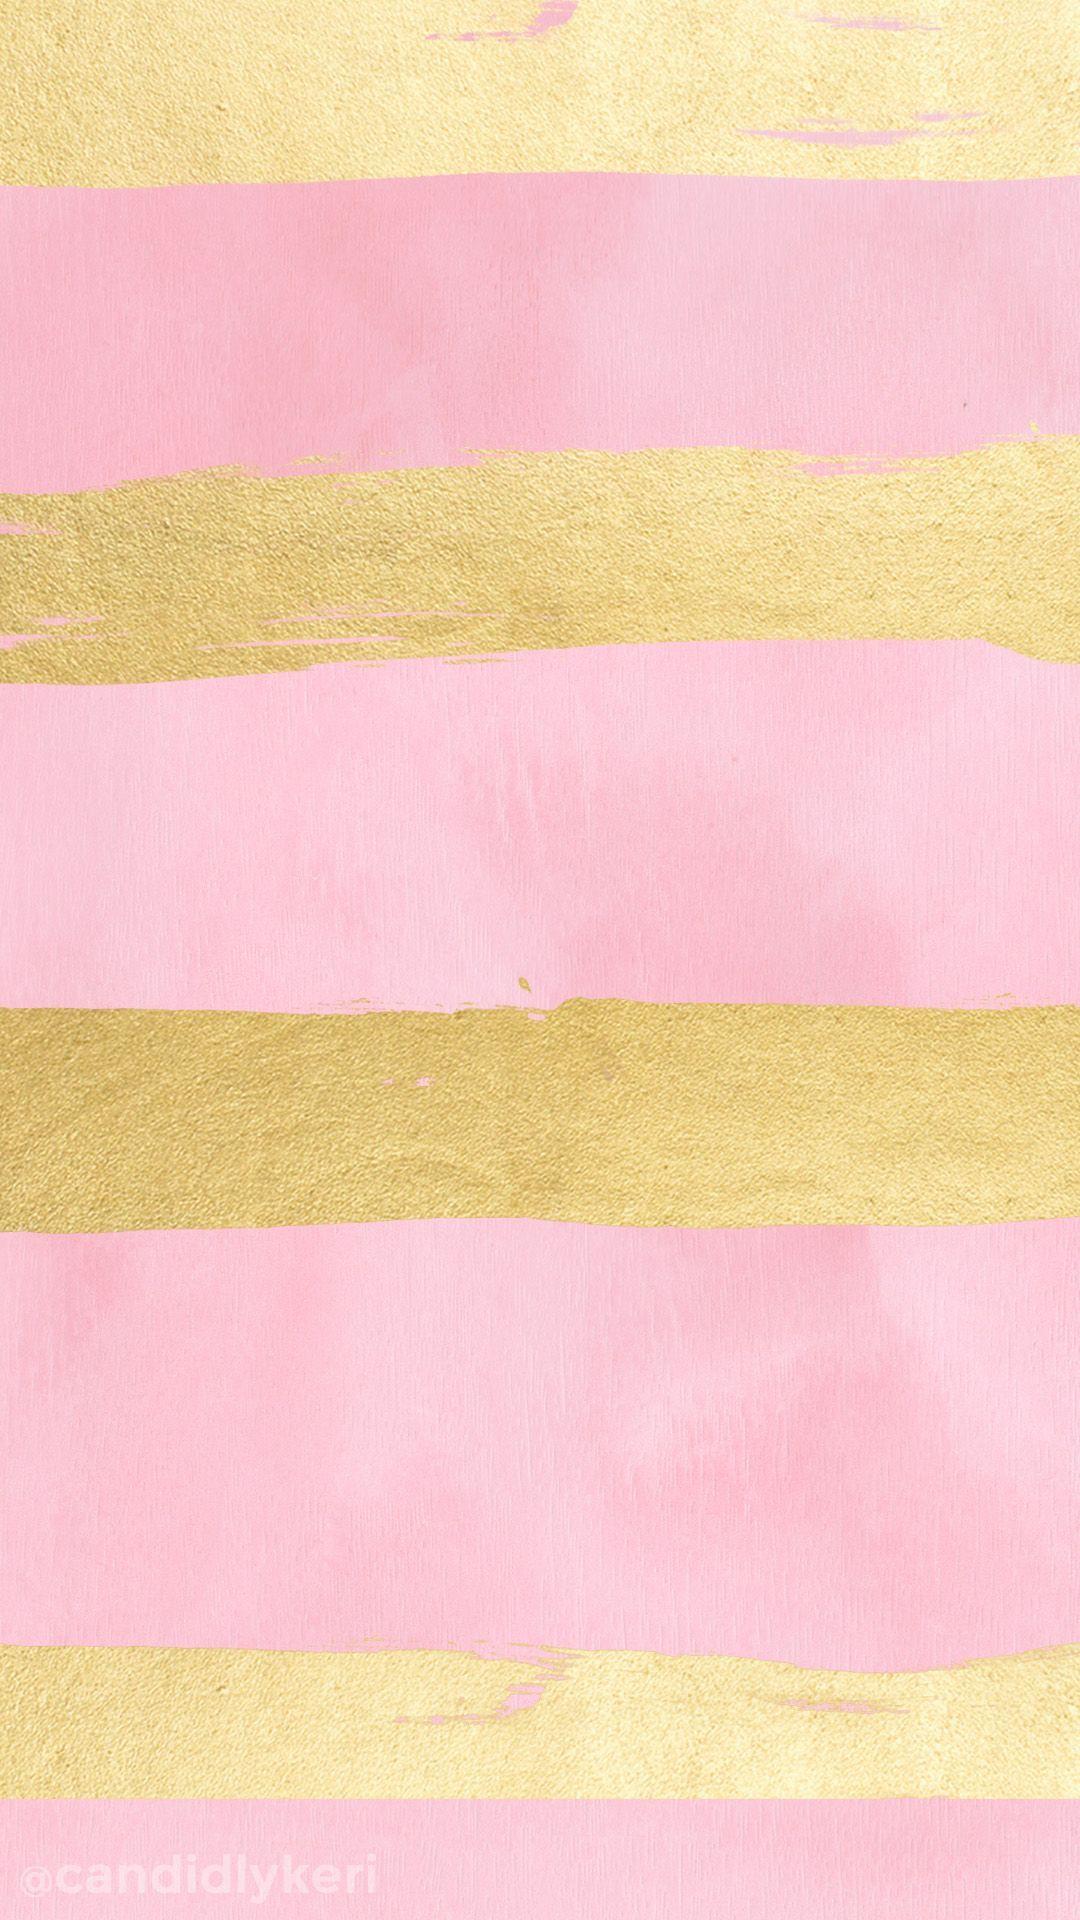 Pink and gold foil pattern background wallpaper you can download for free on the blog! F. Pink and gold wallpaper, Pink and gold background, Gold wallpaper iphone